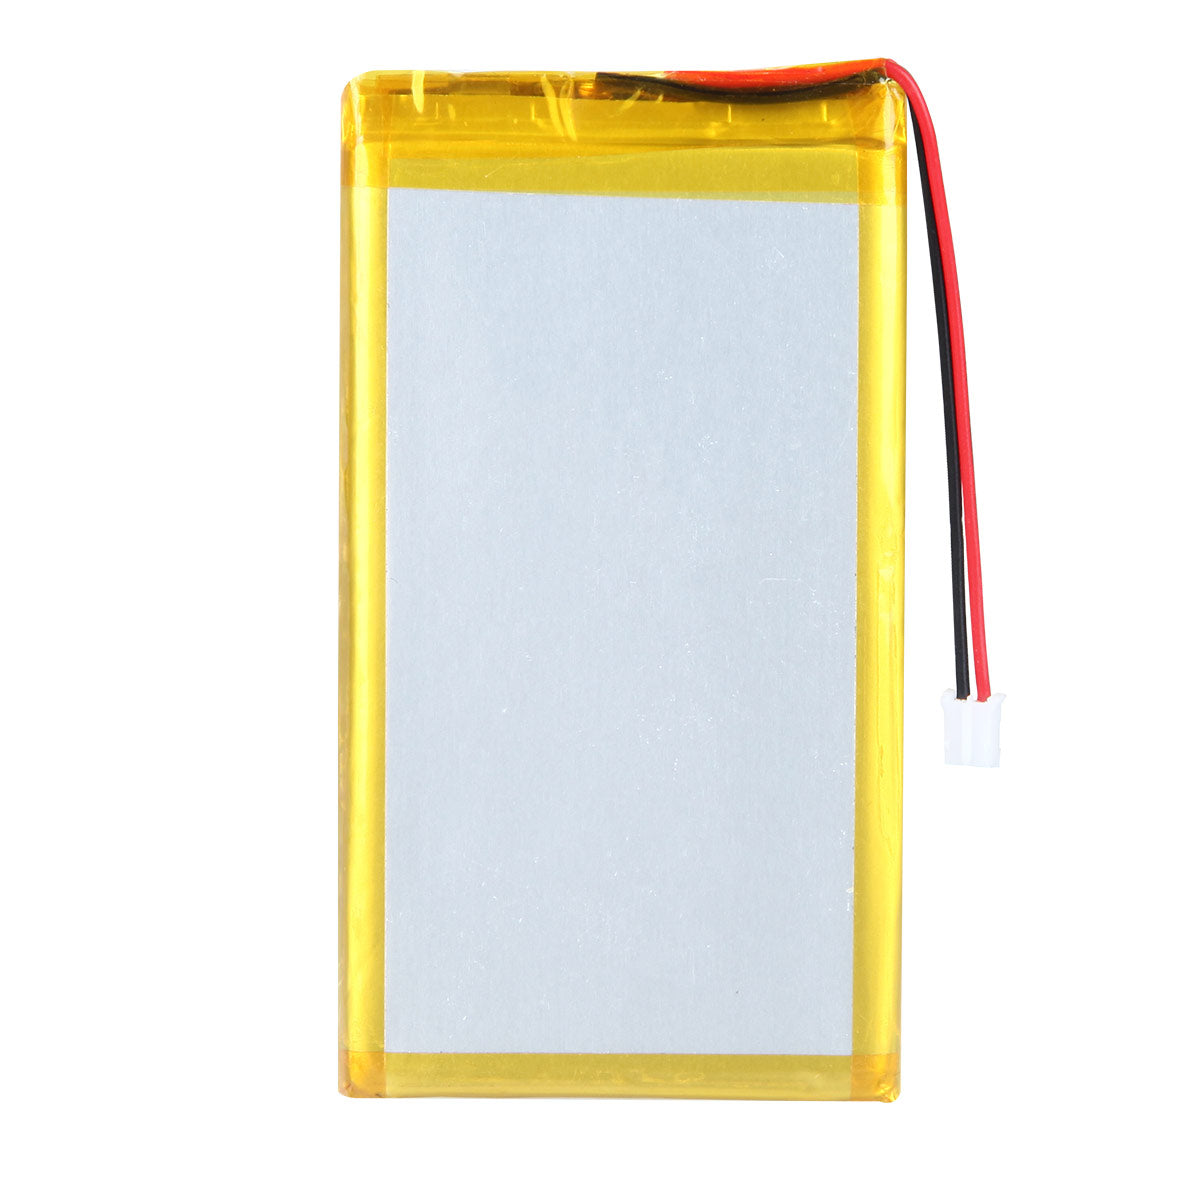 YDL 3.7V 3200mAh 655084 Rechargeable Lithium Polymer Battery